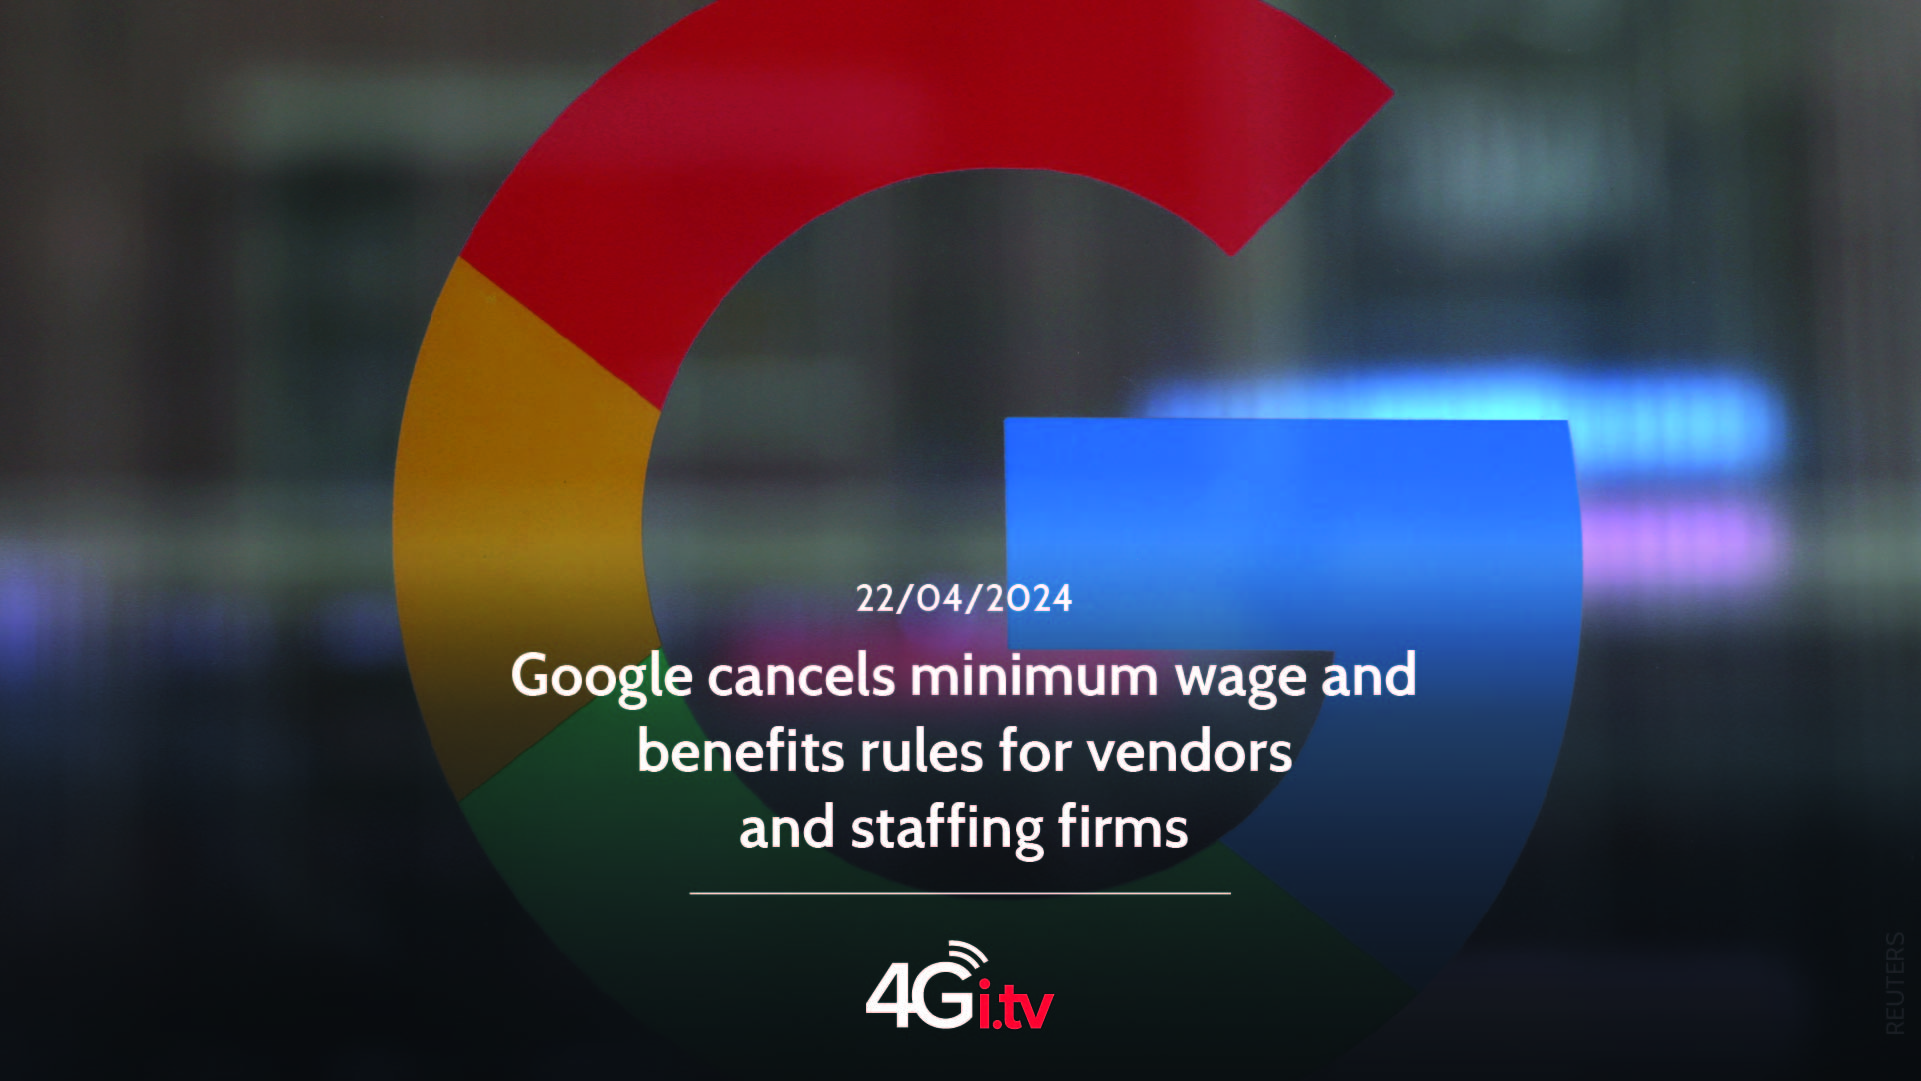 Подробнее о статье Google cancels minimum wage and benefits rules for vendors and staffing firms